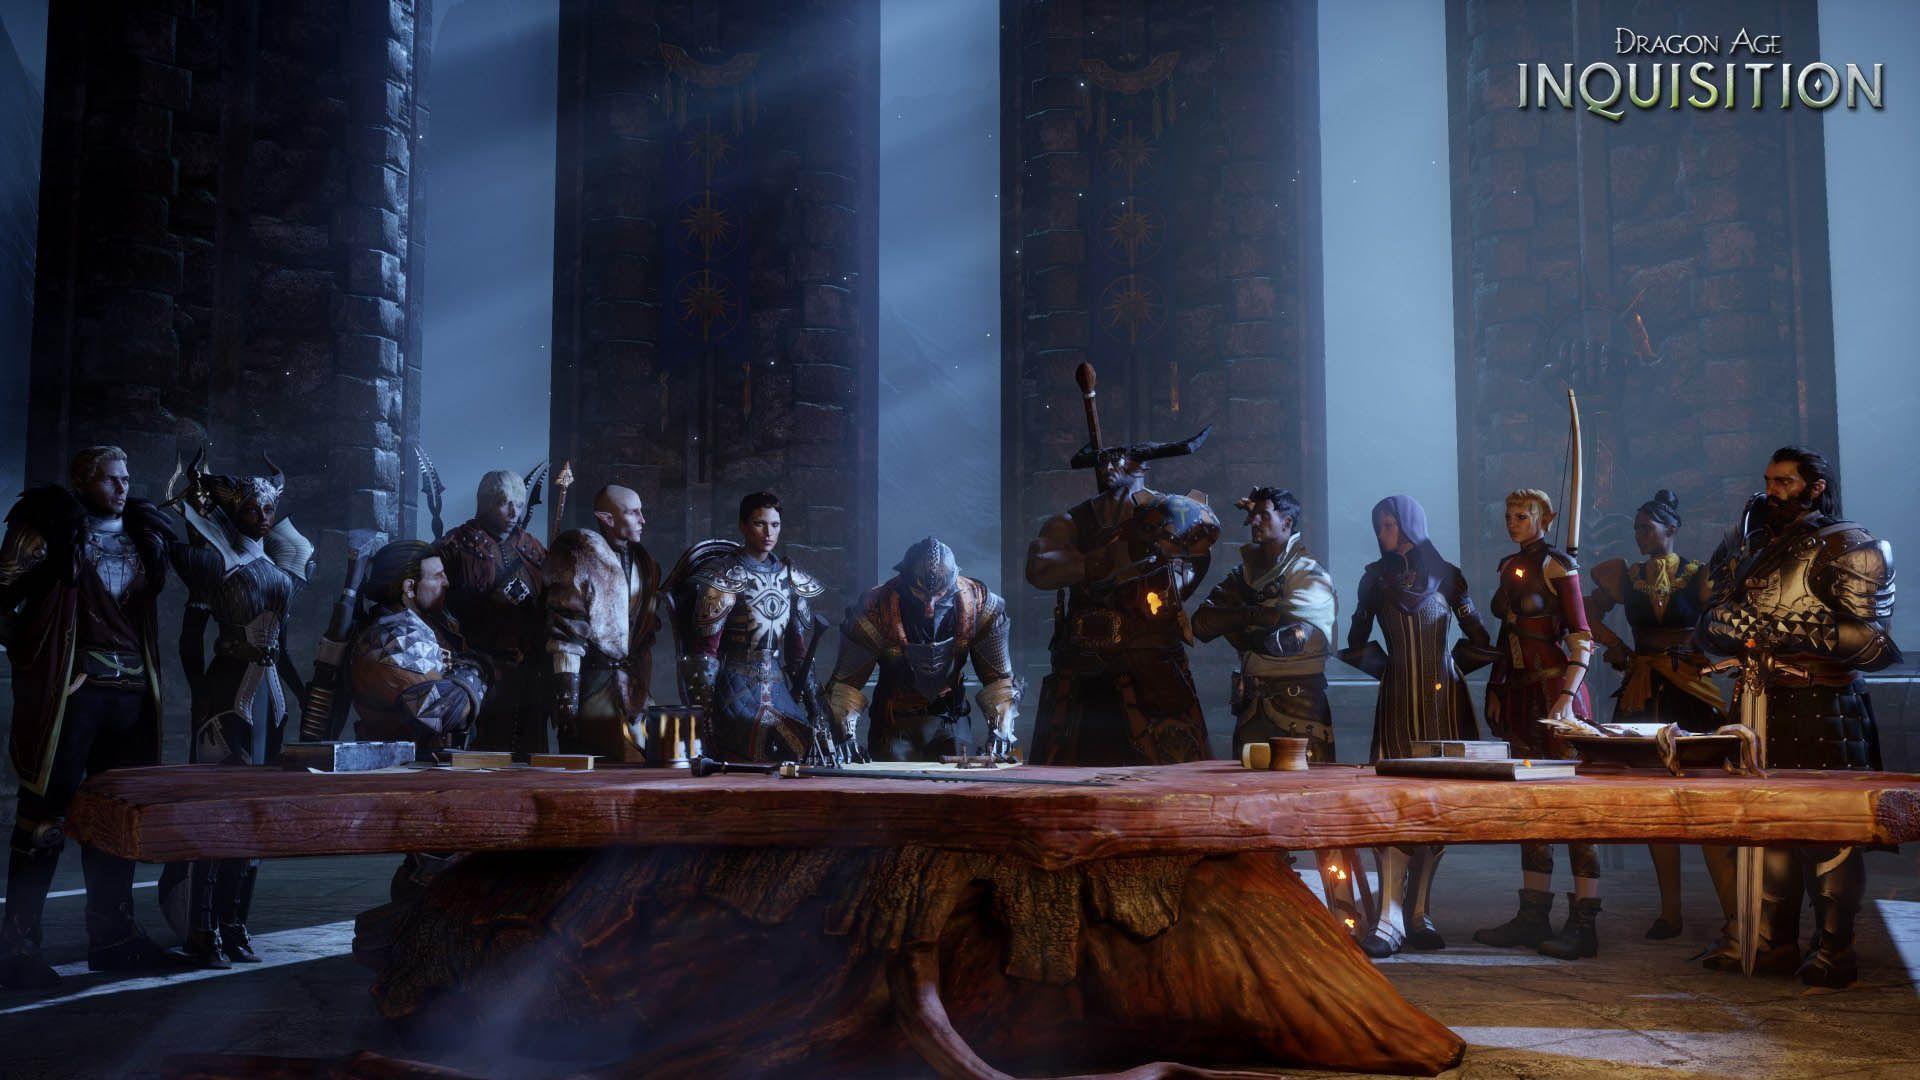 Shades of Grey in Dragon Age: Inquisition